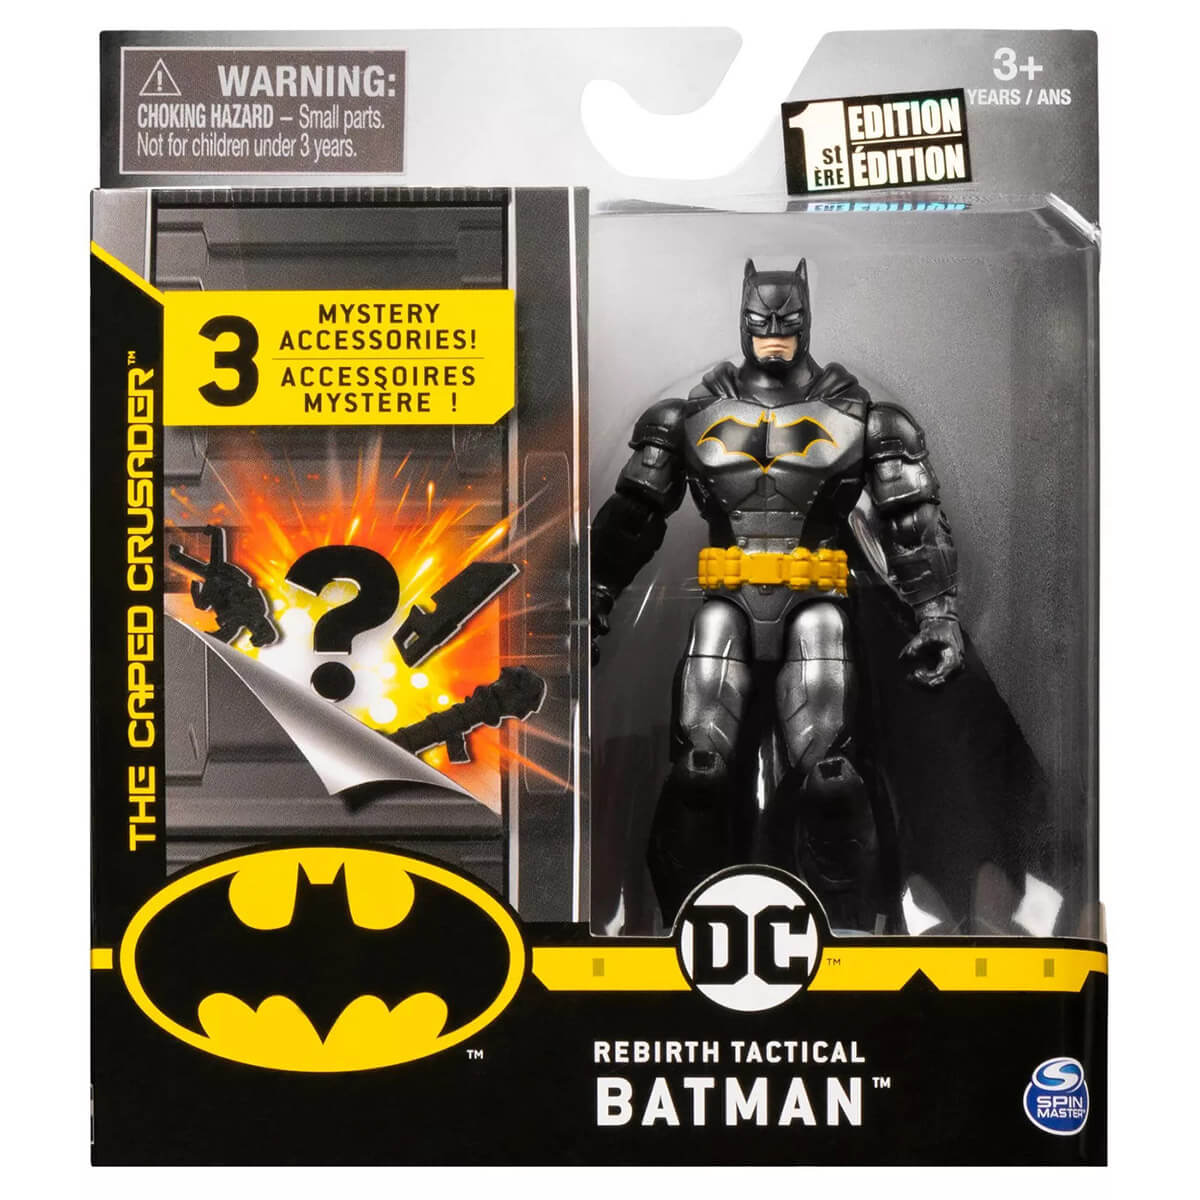 DC Creature Chaos Rebirth Tactical Batman with Accessories